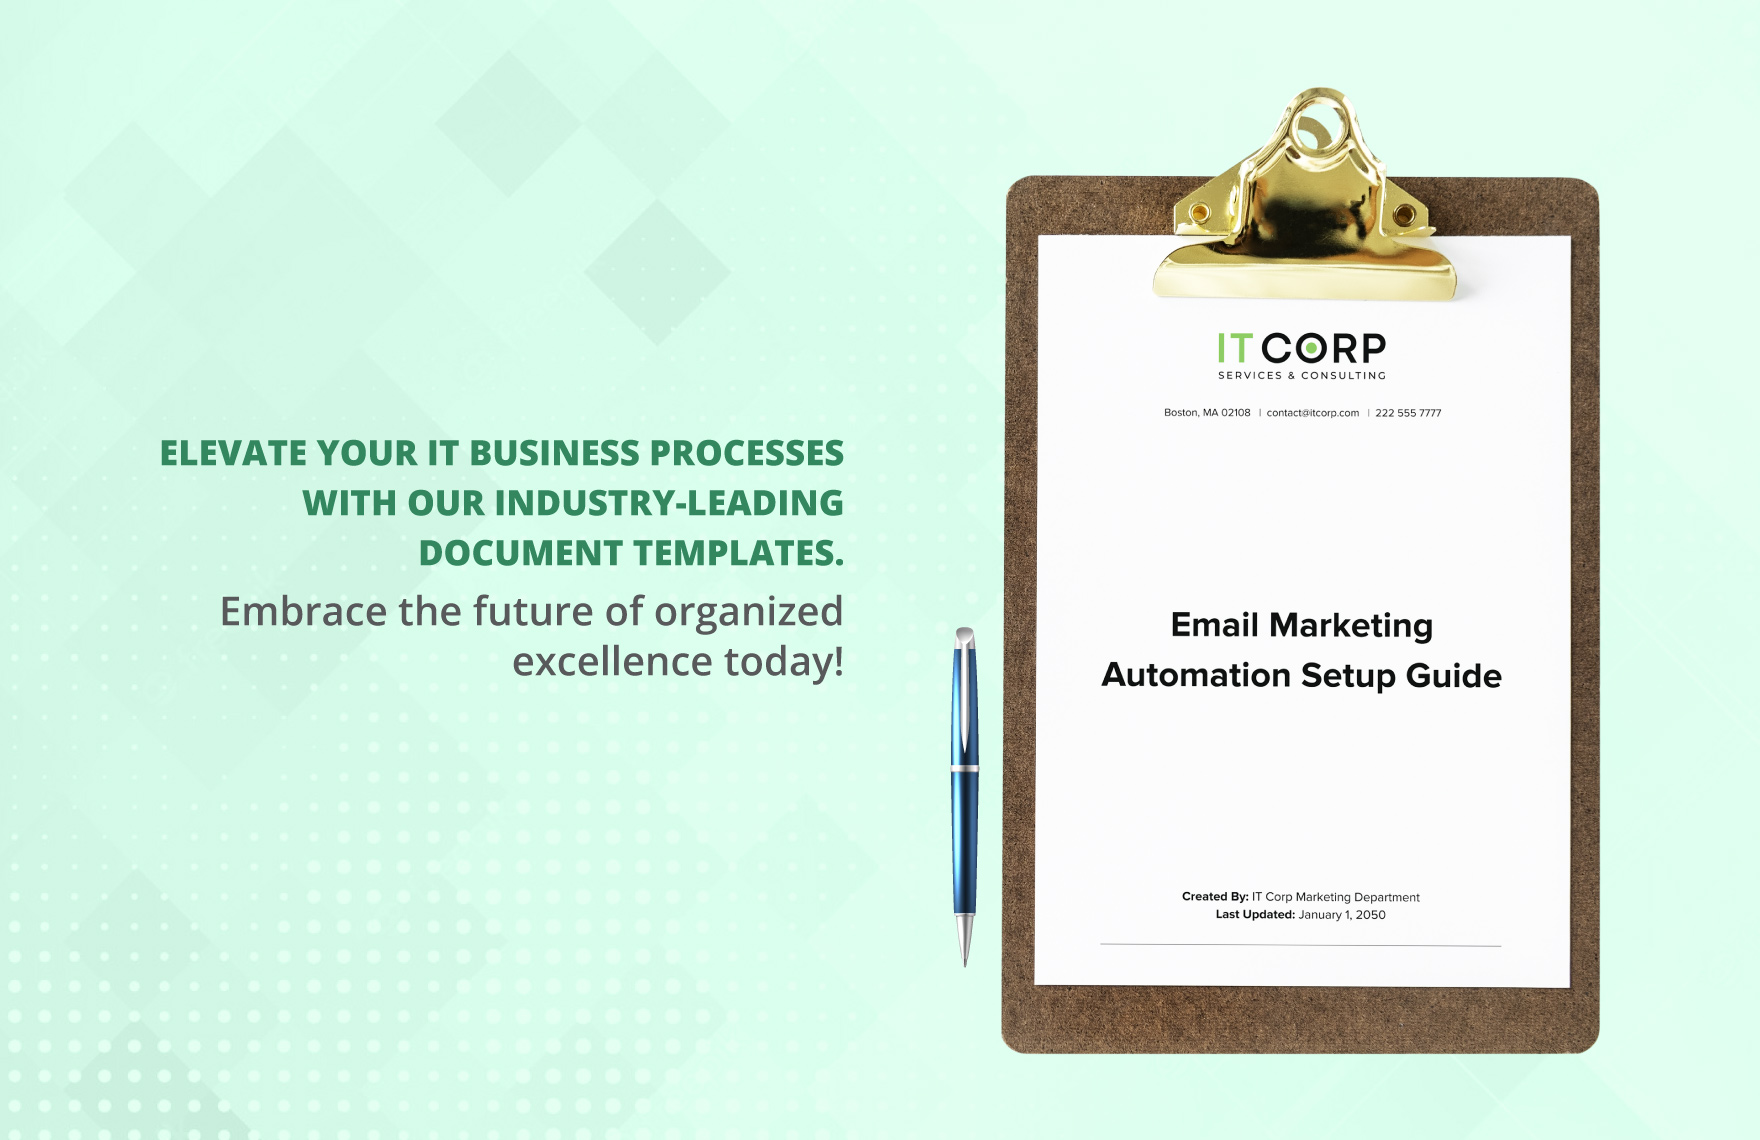 Email Marketing GDPR and Email Marketing Policy & Procedure Template